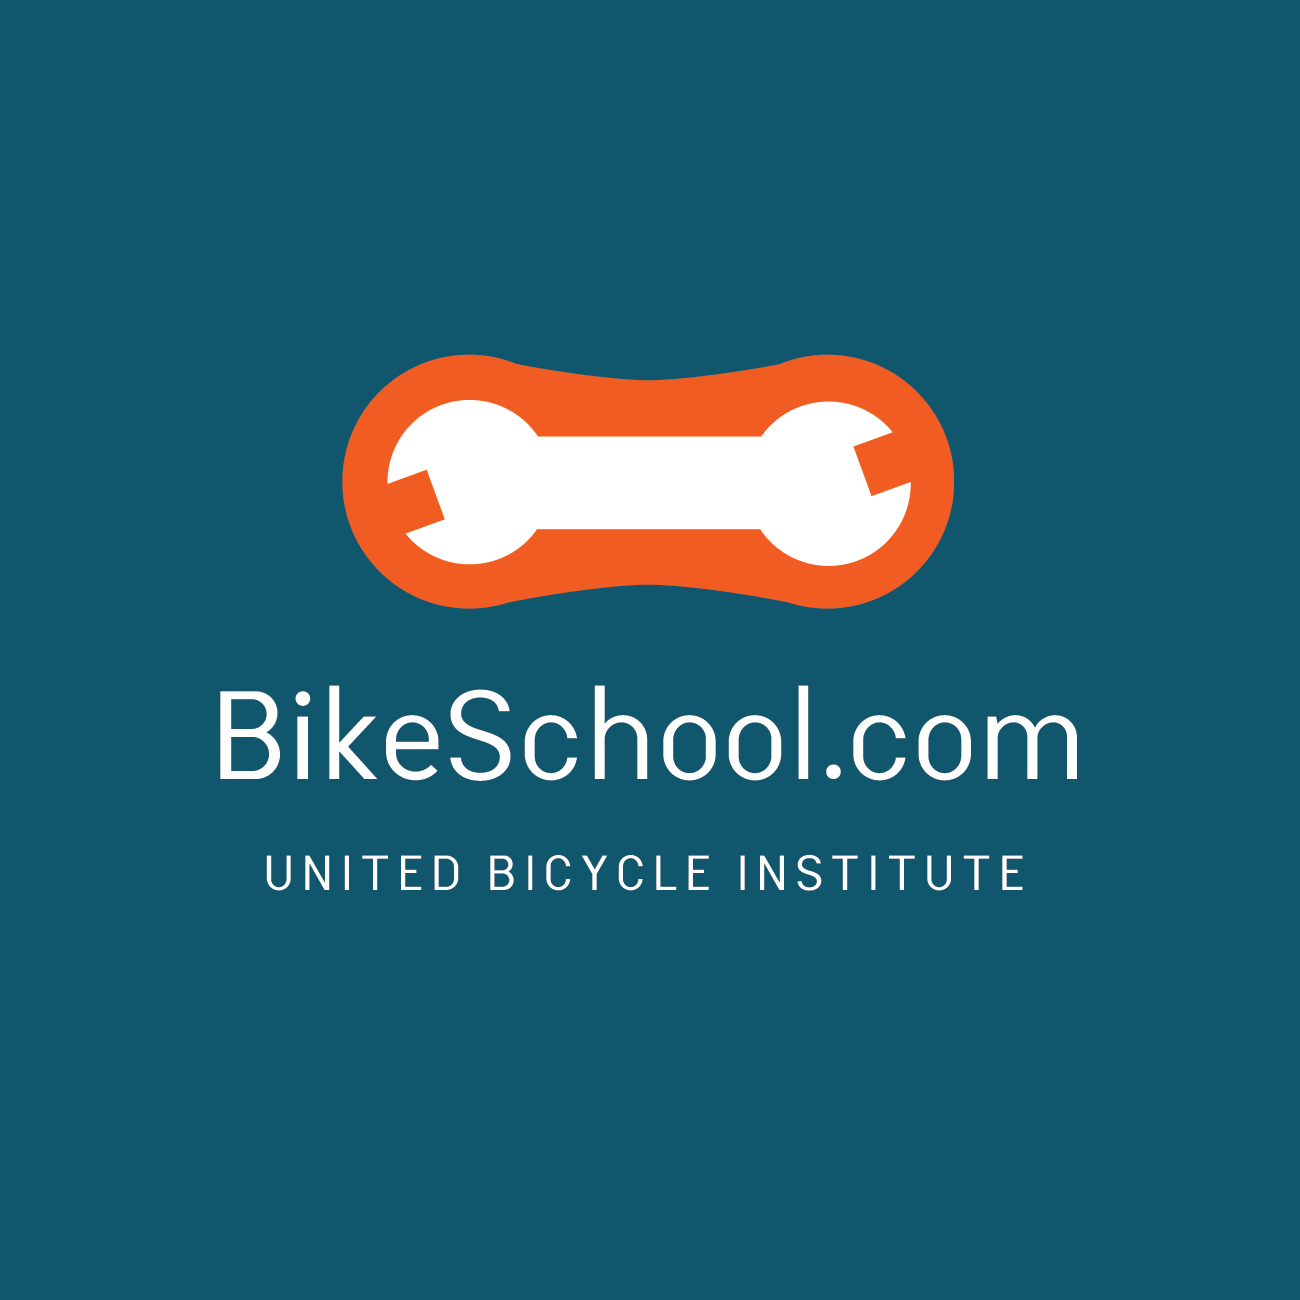 united_bicycle_institute_logo.png